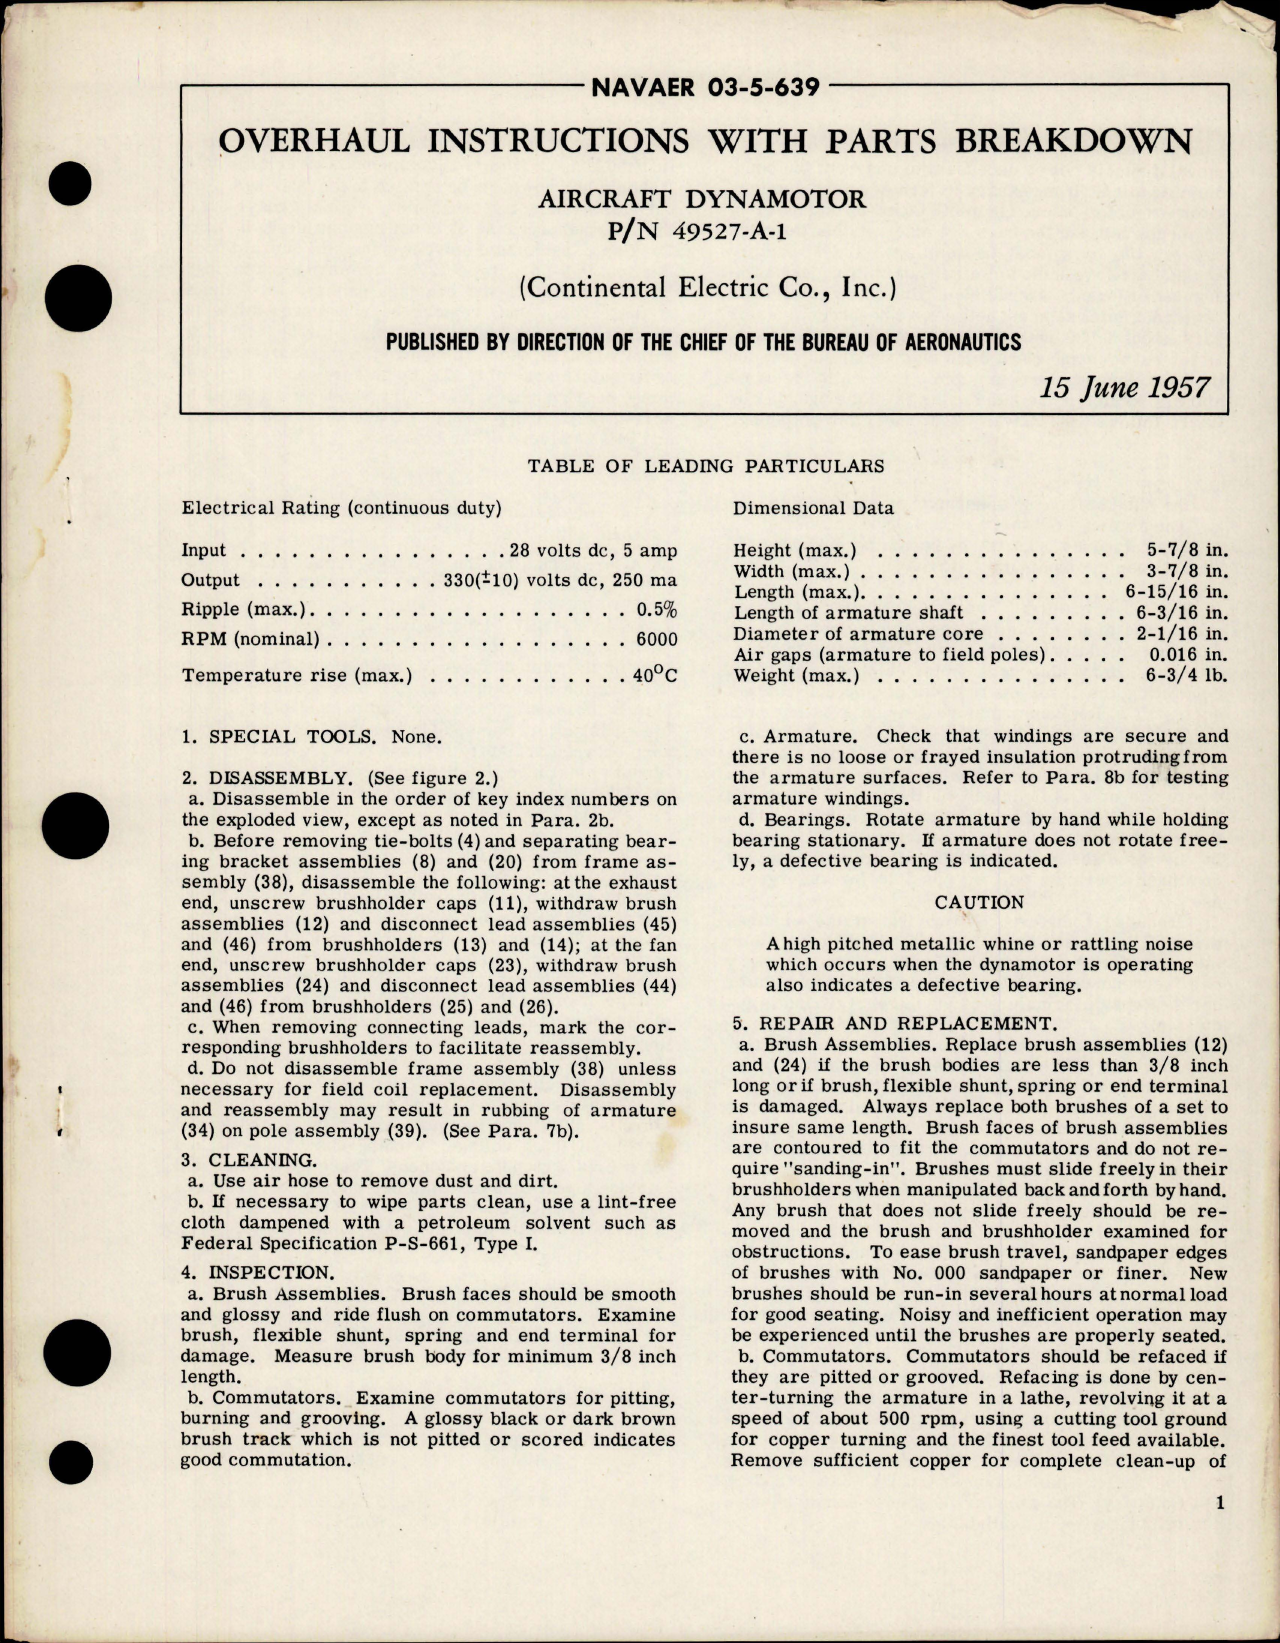 Sample page 1 from AirCorps Library document: Overhaul Instructions with Parts Breakdown for Aircraft Dynamotor - Part 49527-A-1 